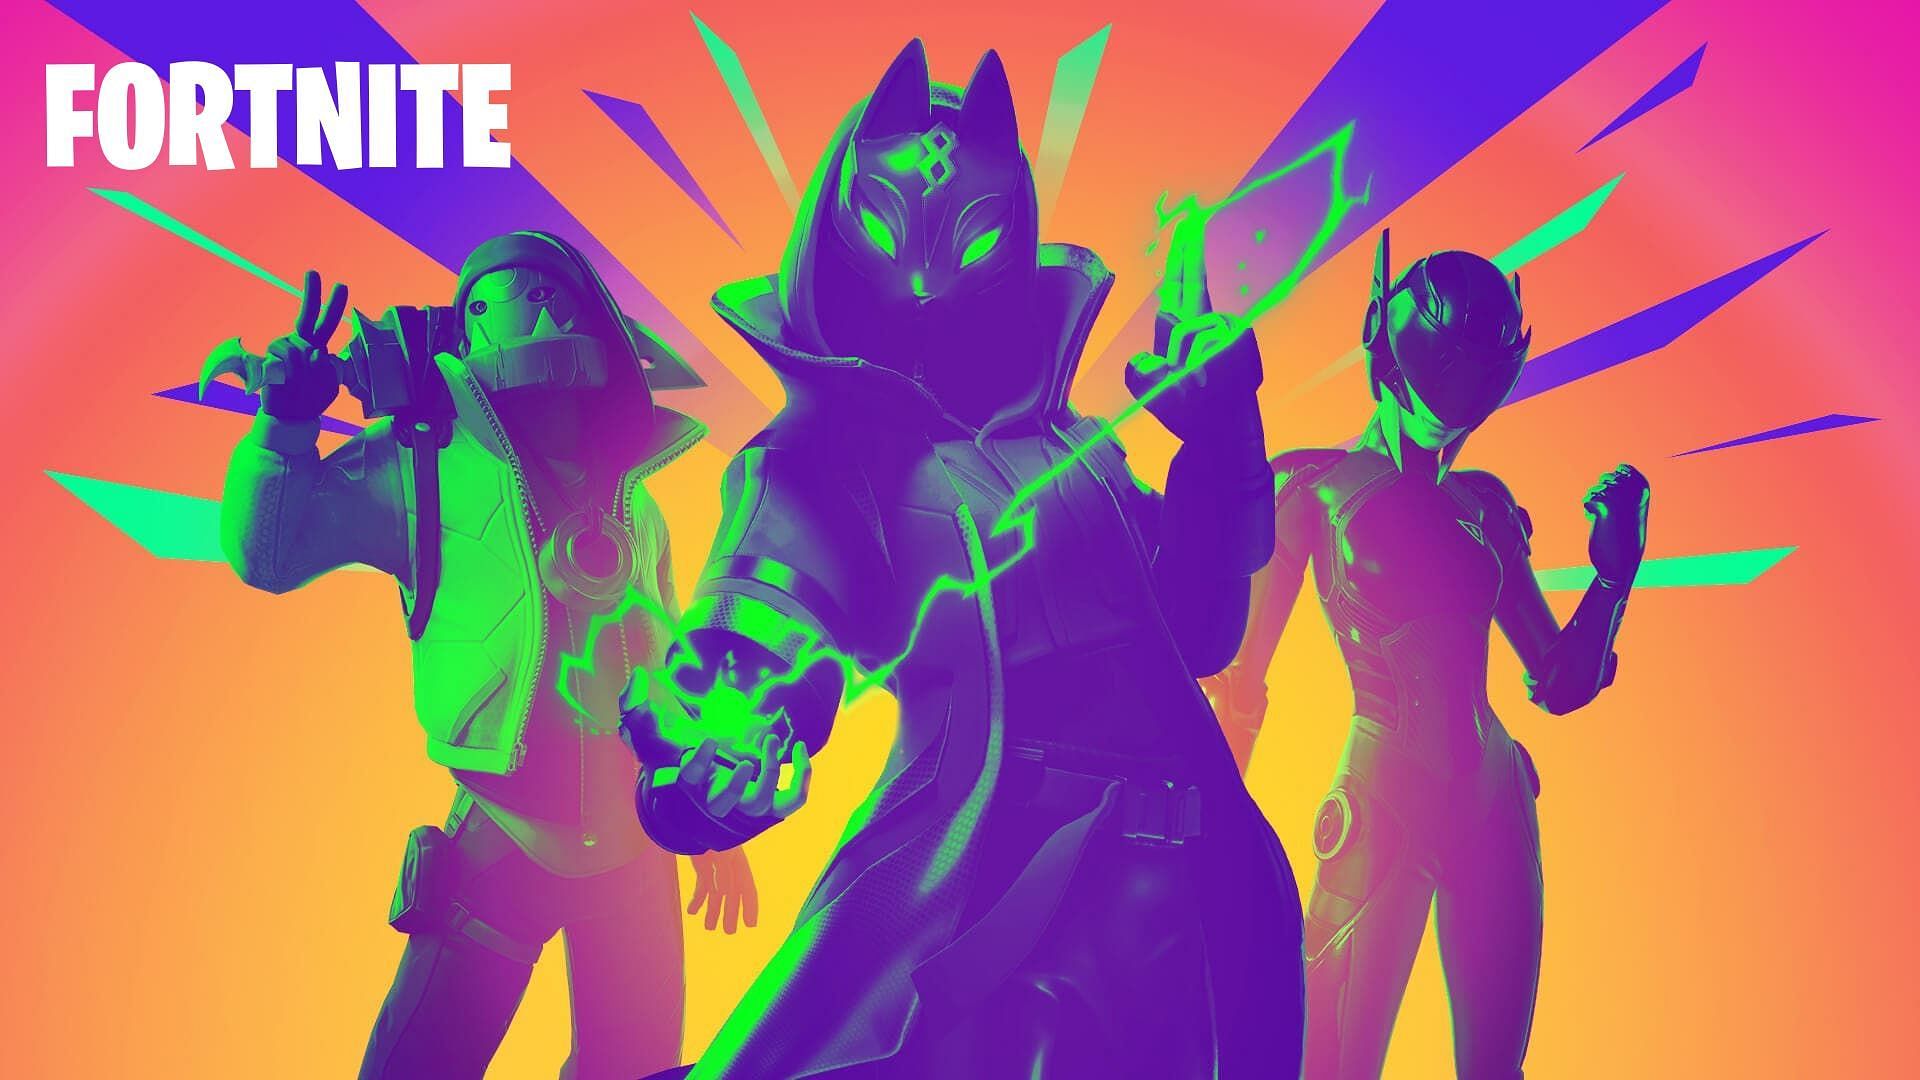 Fortnite pros being over taken by underrated players